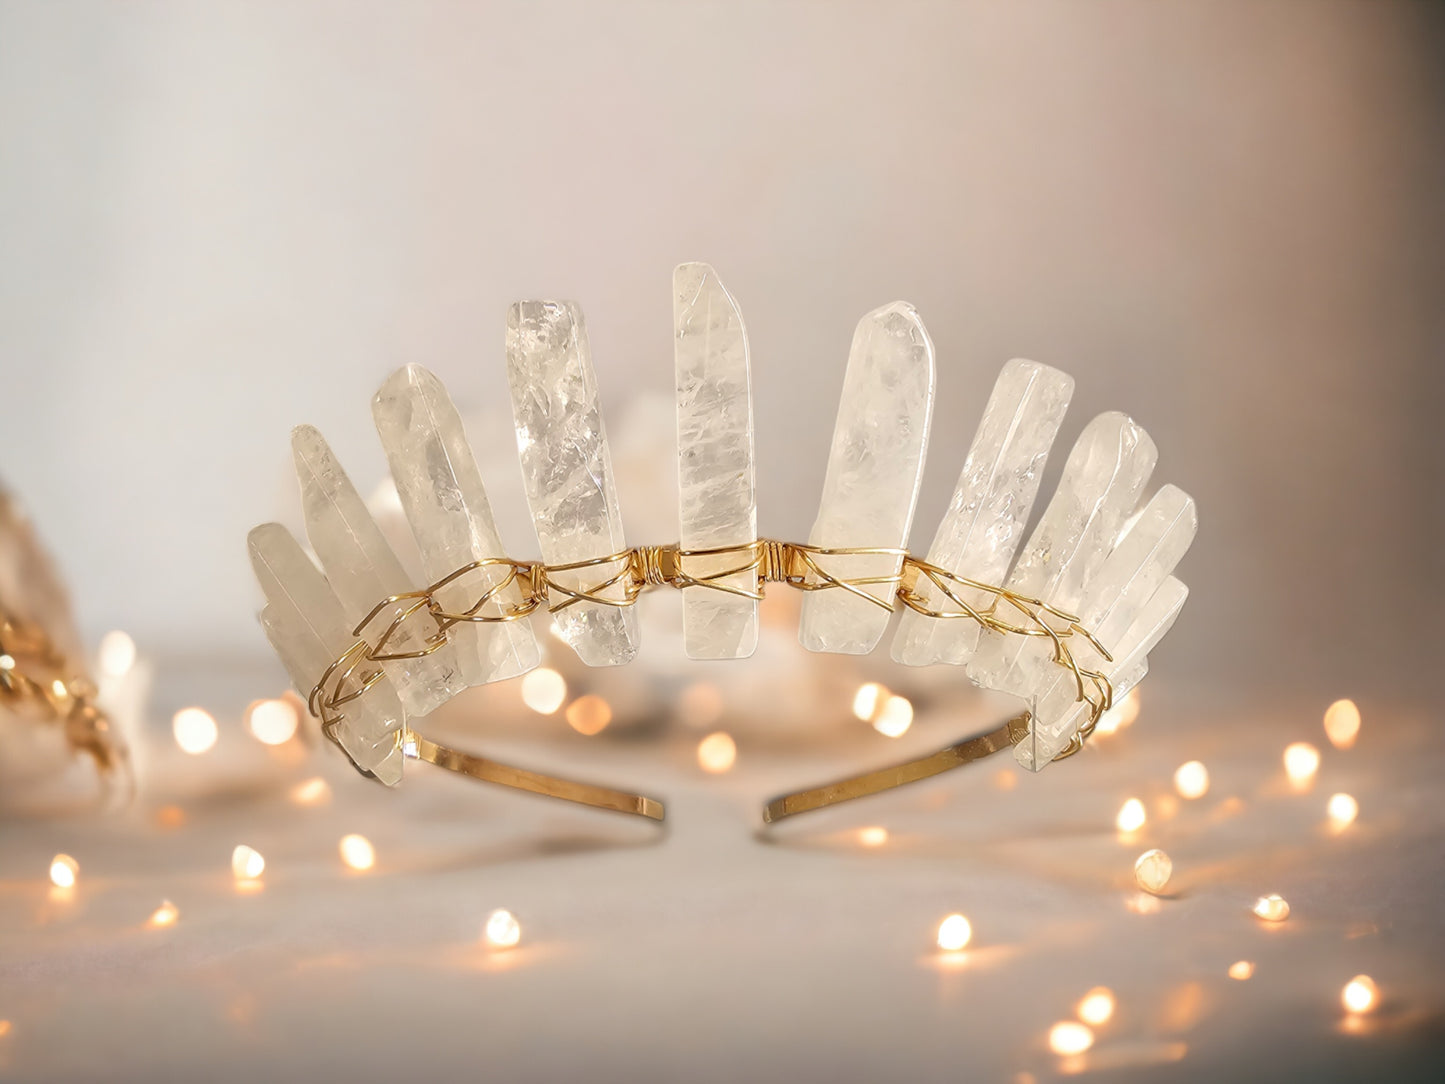 Made to be light and flexible, these crowns will have you feeling like a goddess ready to dance the night away! Perfect for your special occasion, each crown can be customized by band and wire colors.